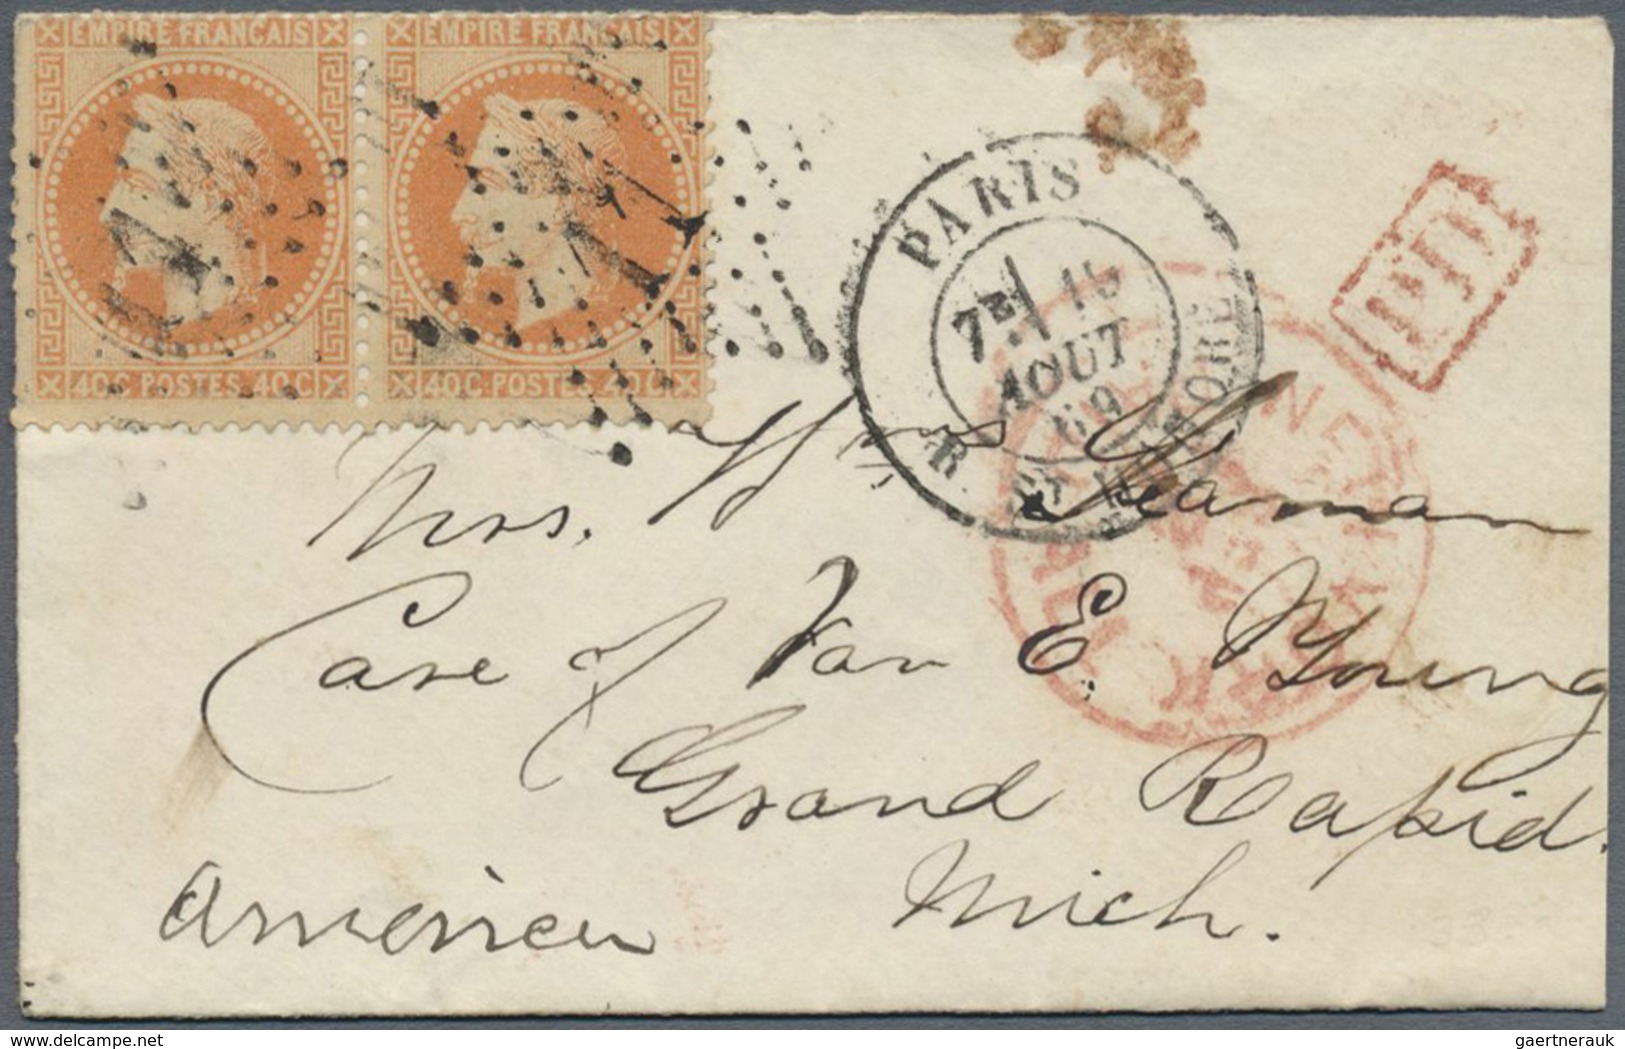 Br Frankreich: 1856/1975, Mail to USA, holding of apprx. 70 entires to USA bearing frankings Ceres and